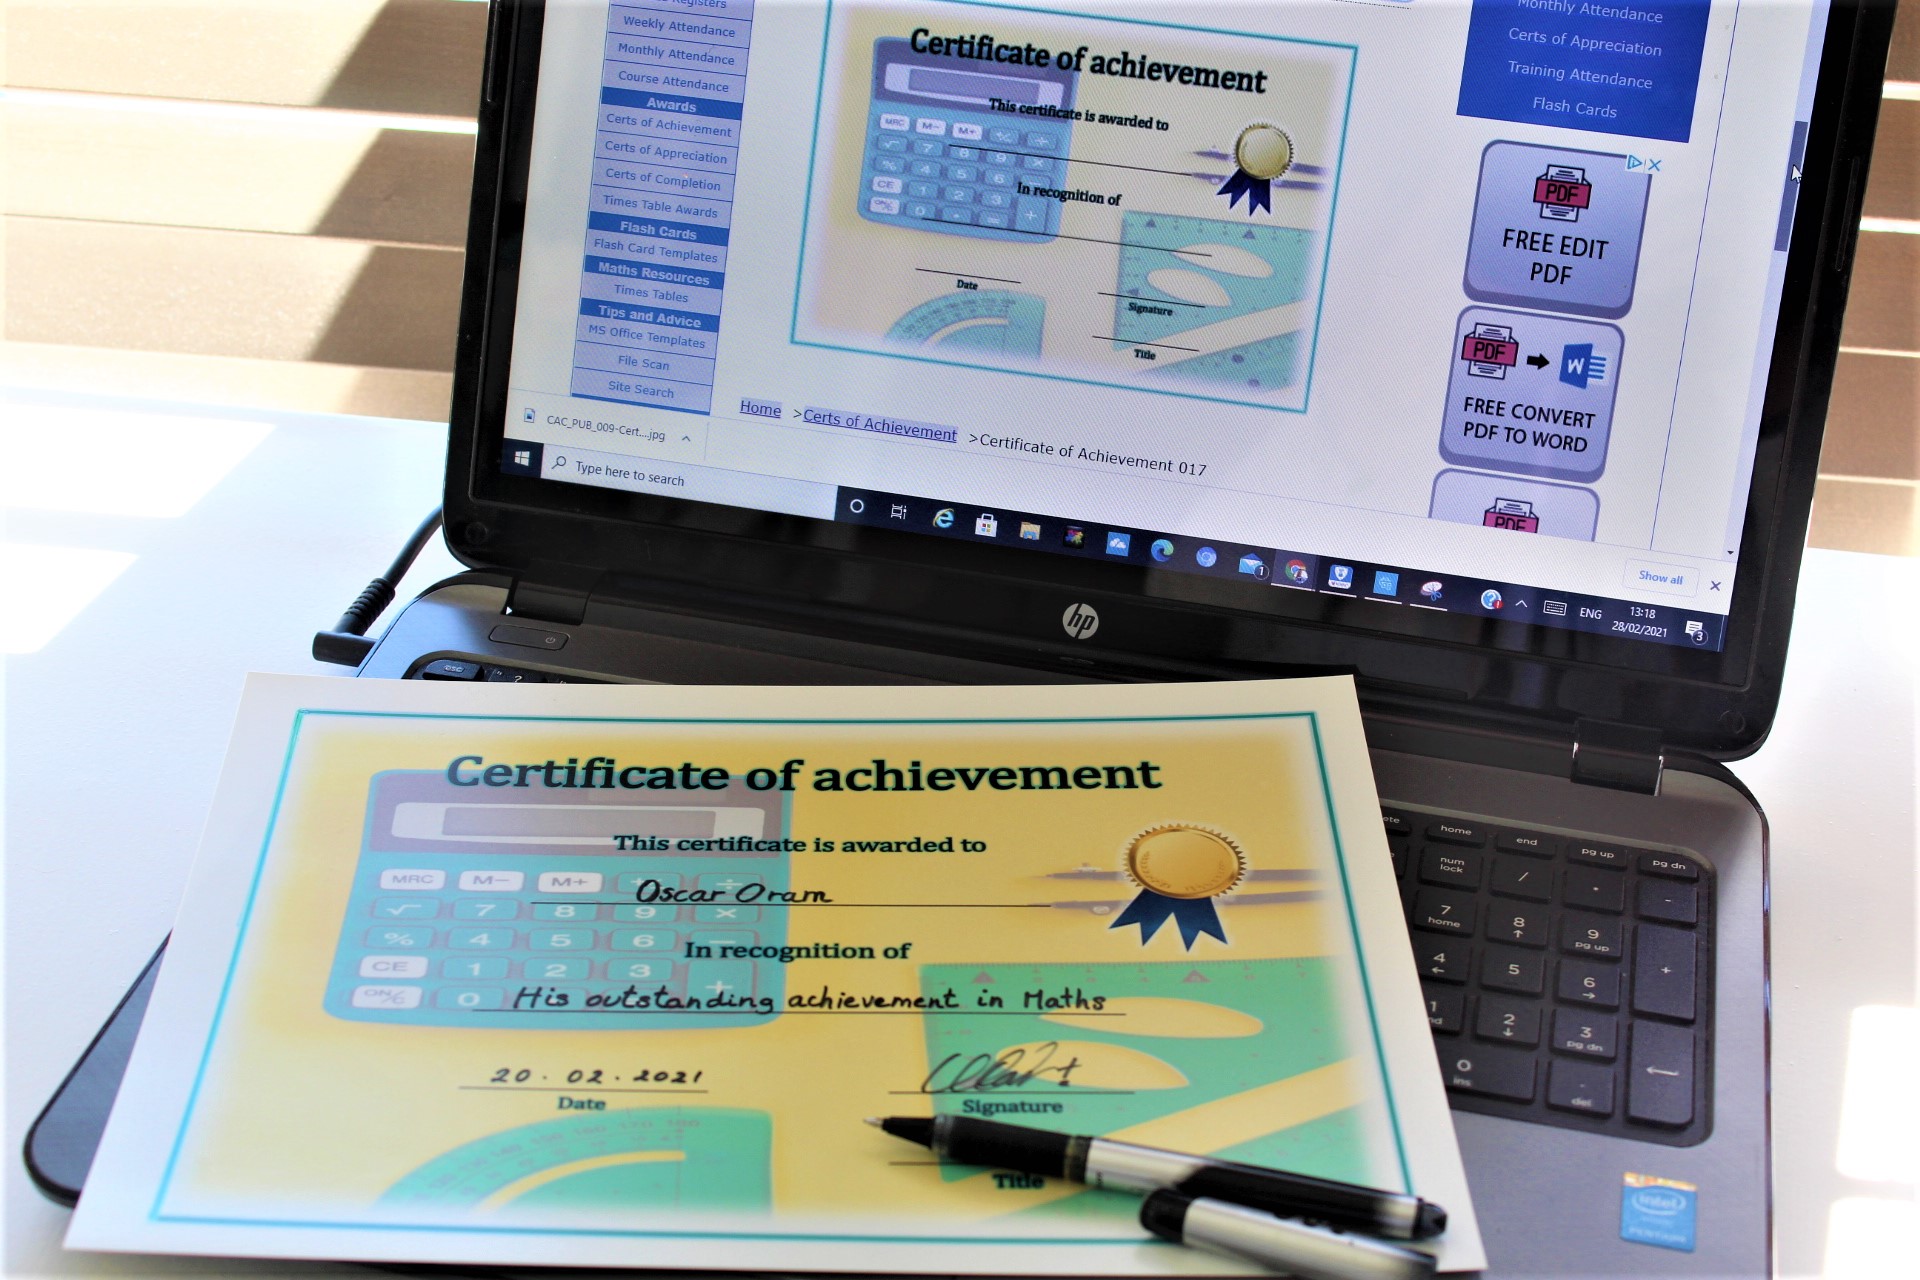 Certificates of Achievement, Completion and Appreciation